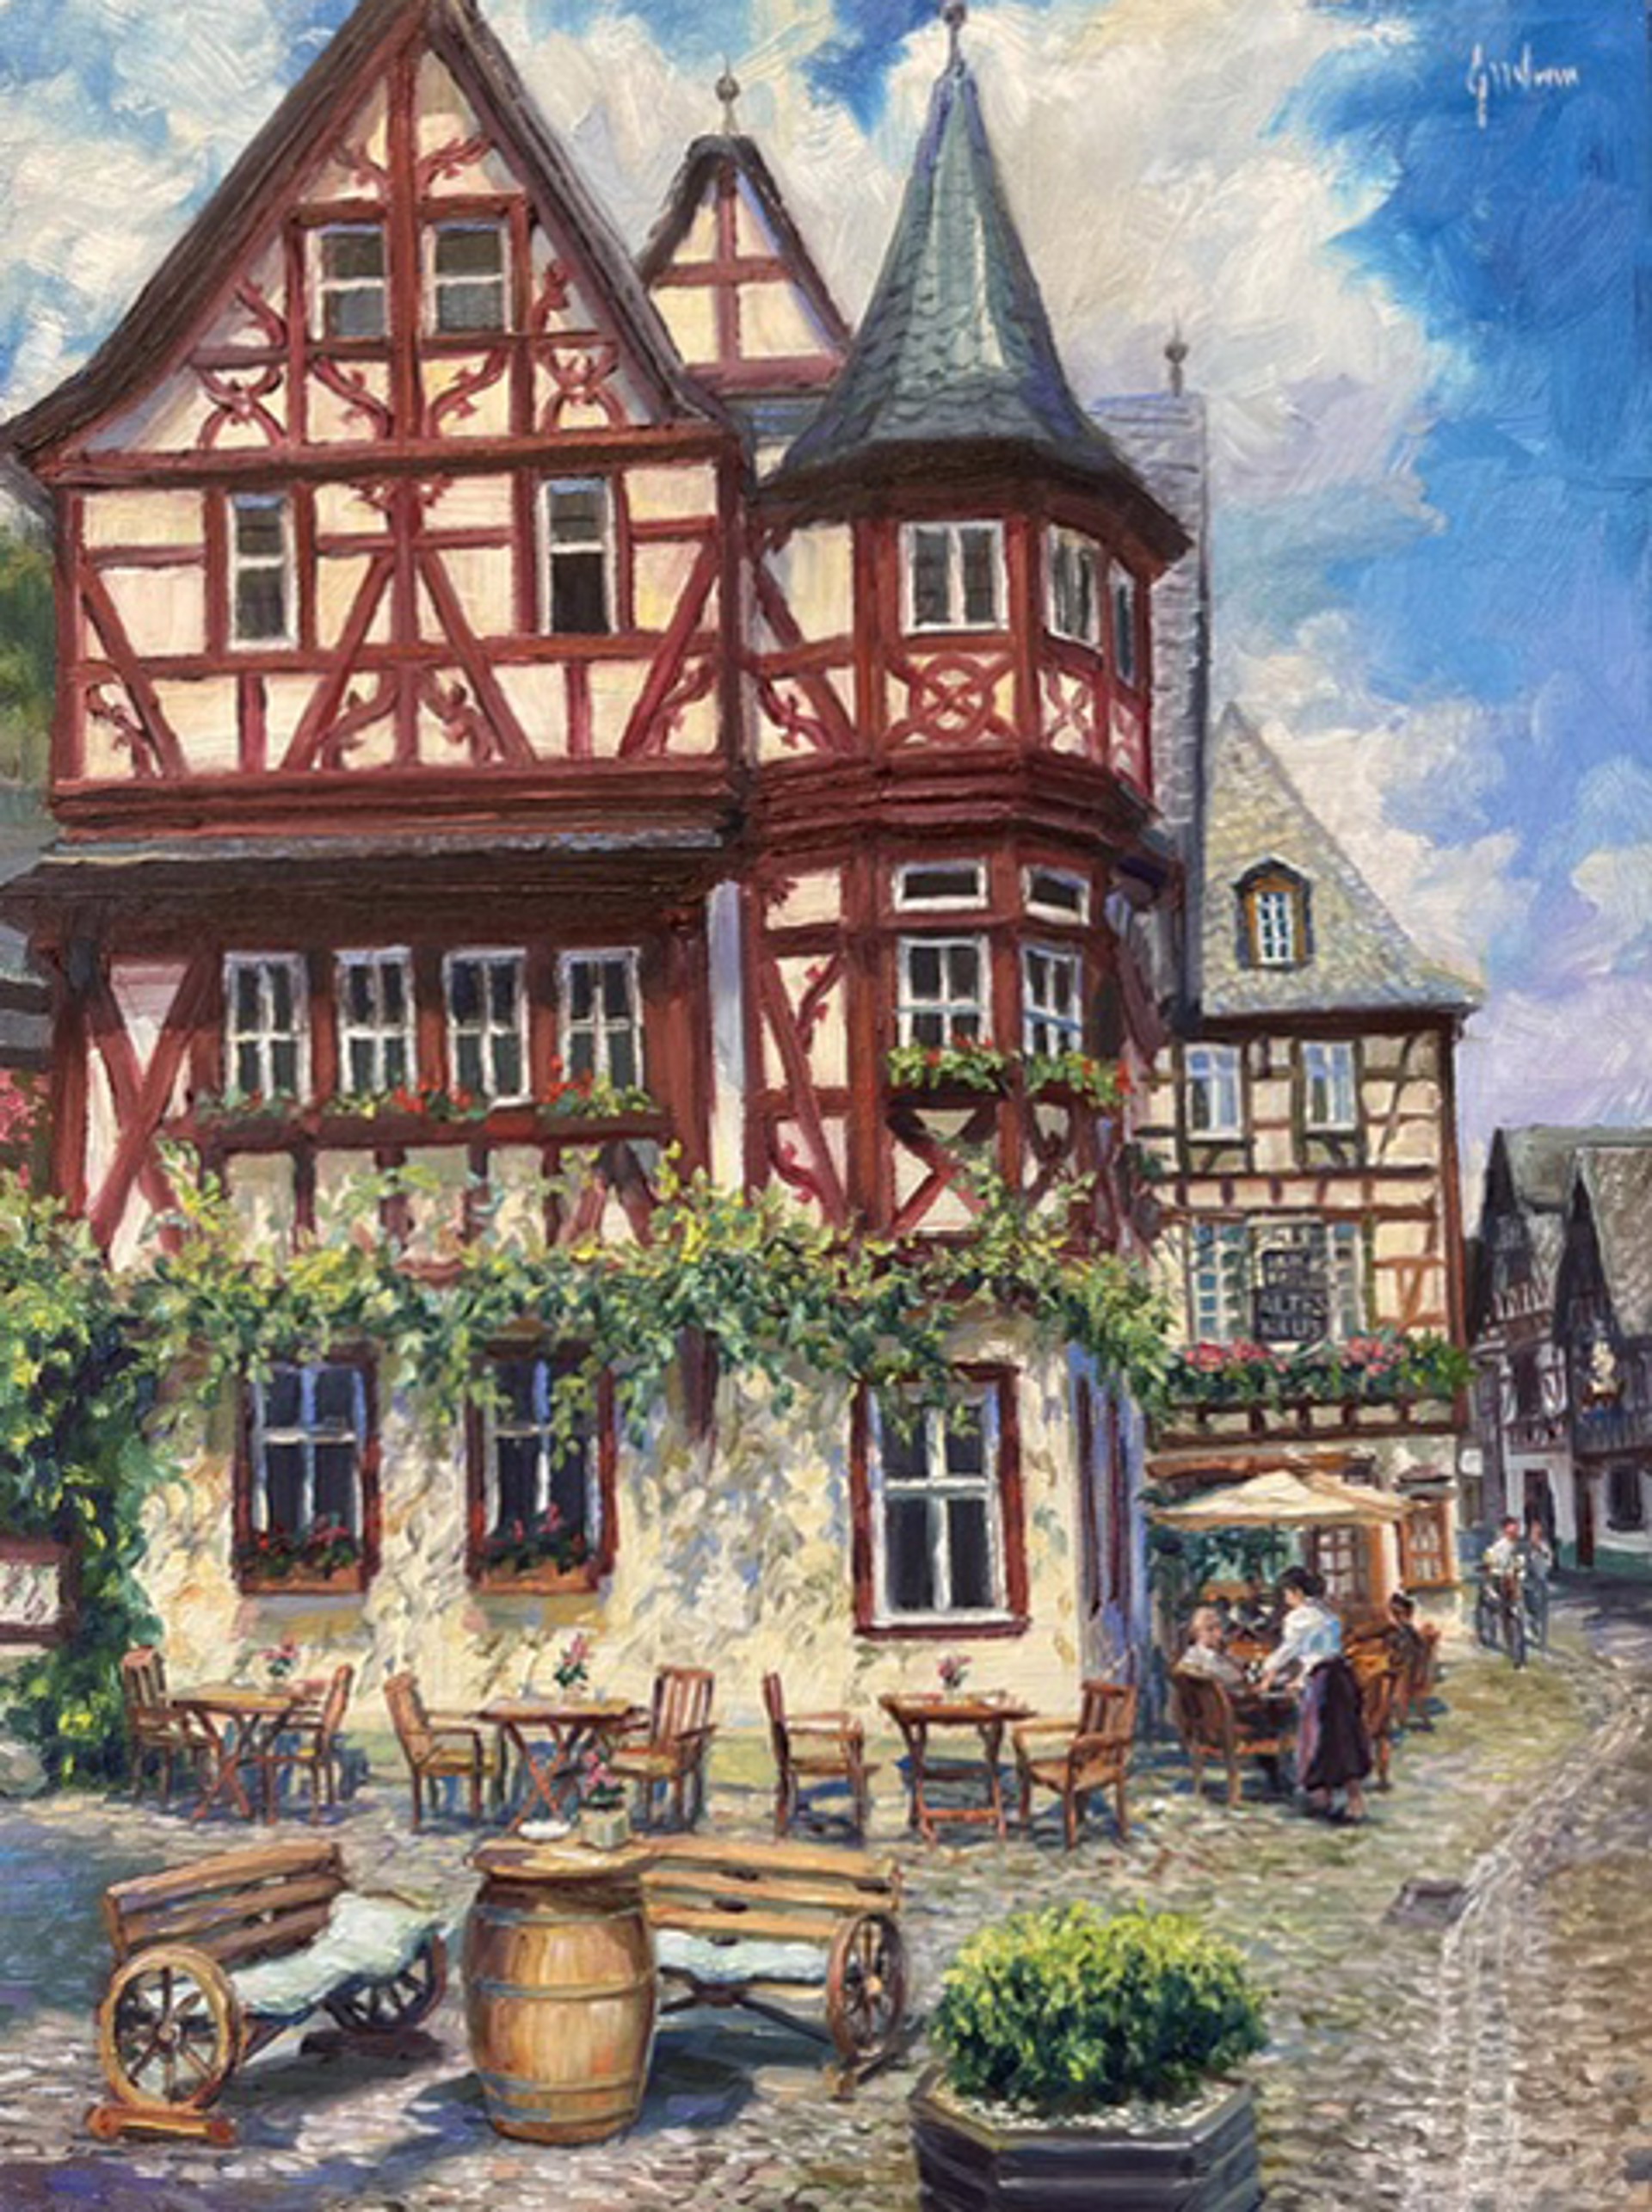 Wein Haus Altes Haus, Bacharach by Lindsay Goodwin